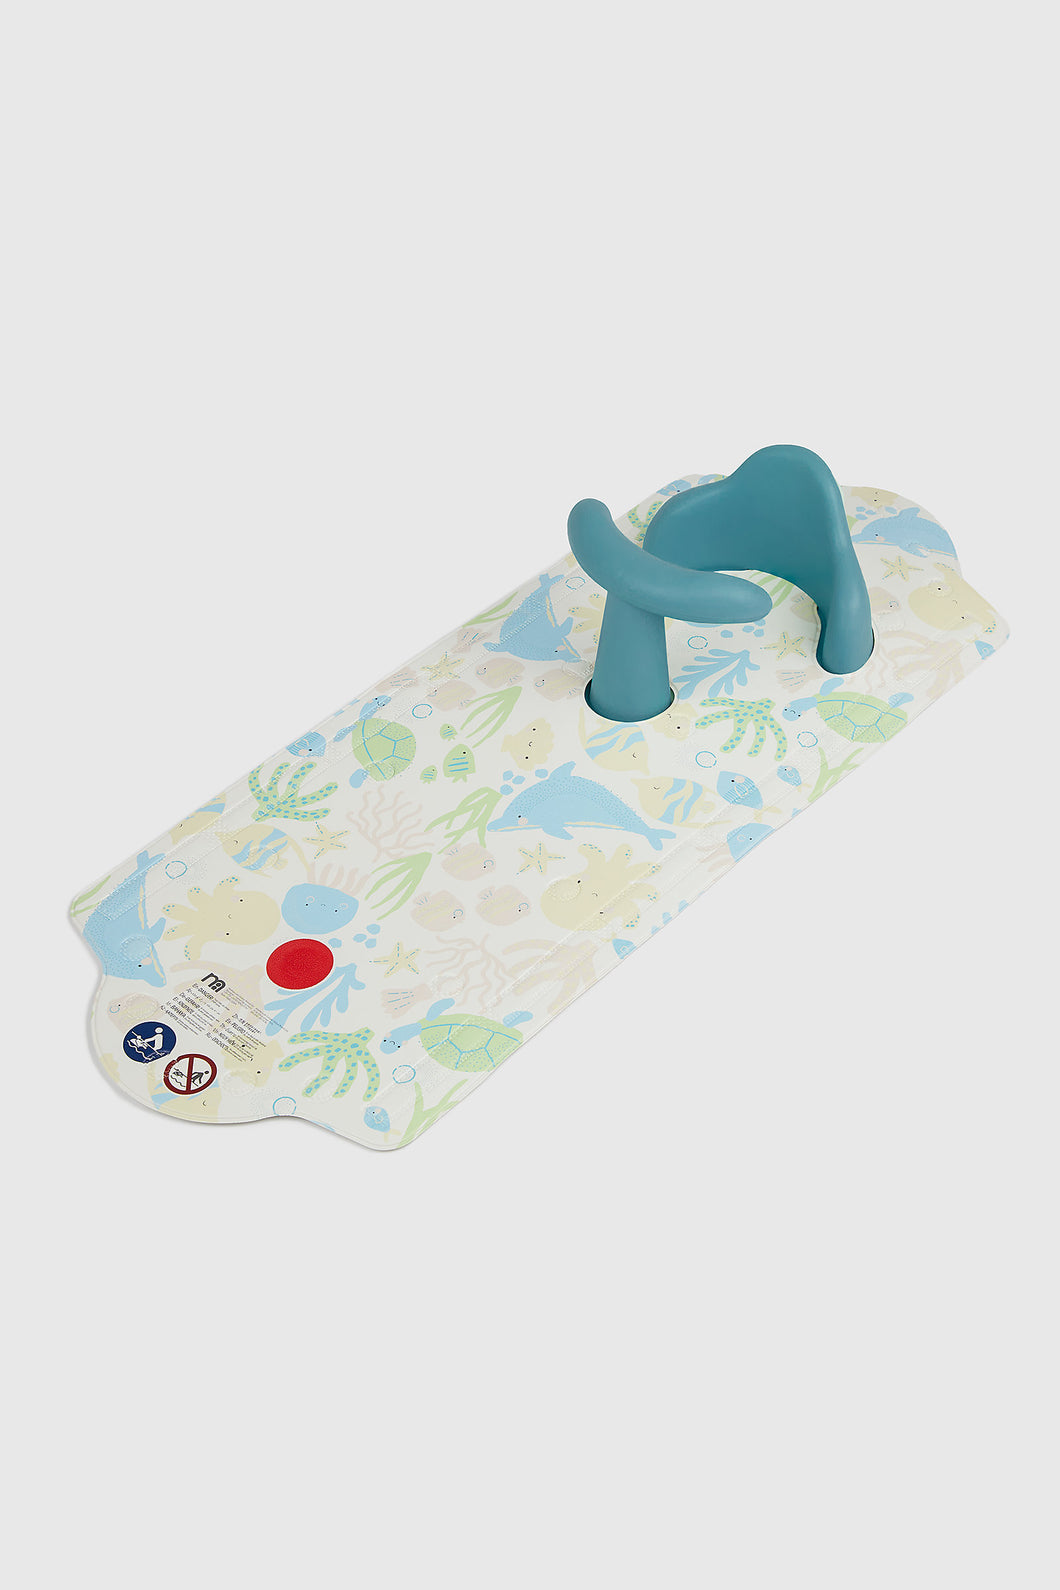 Mothercare Aquapod Bath Mat with Support